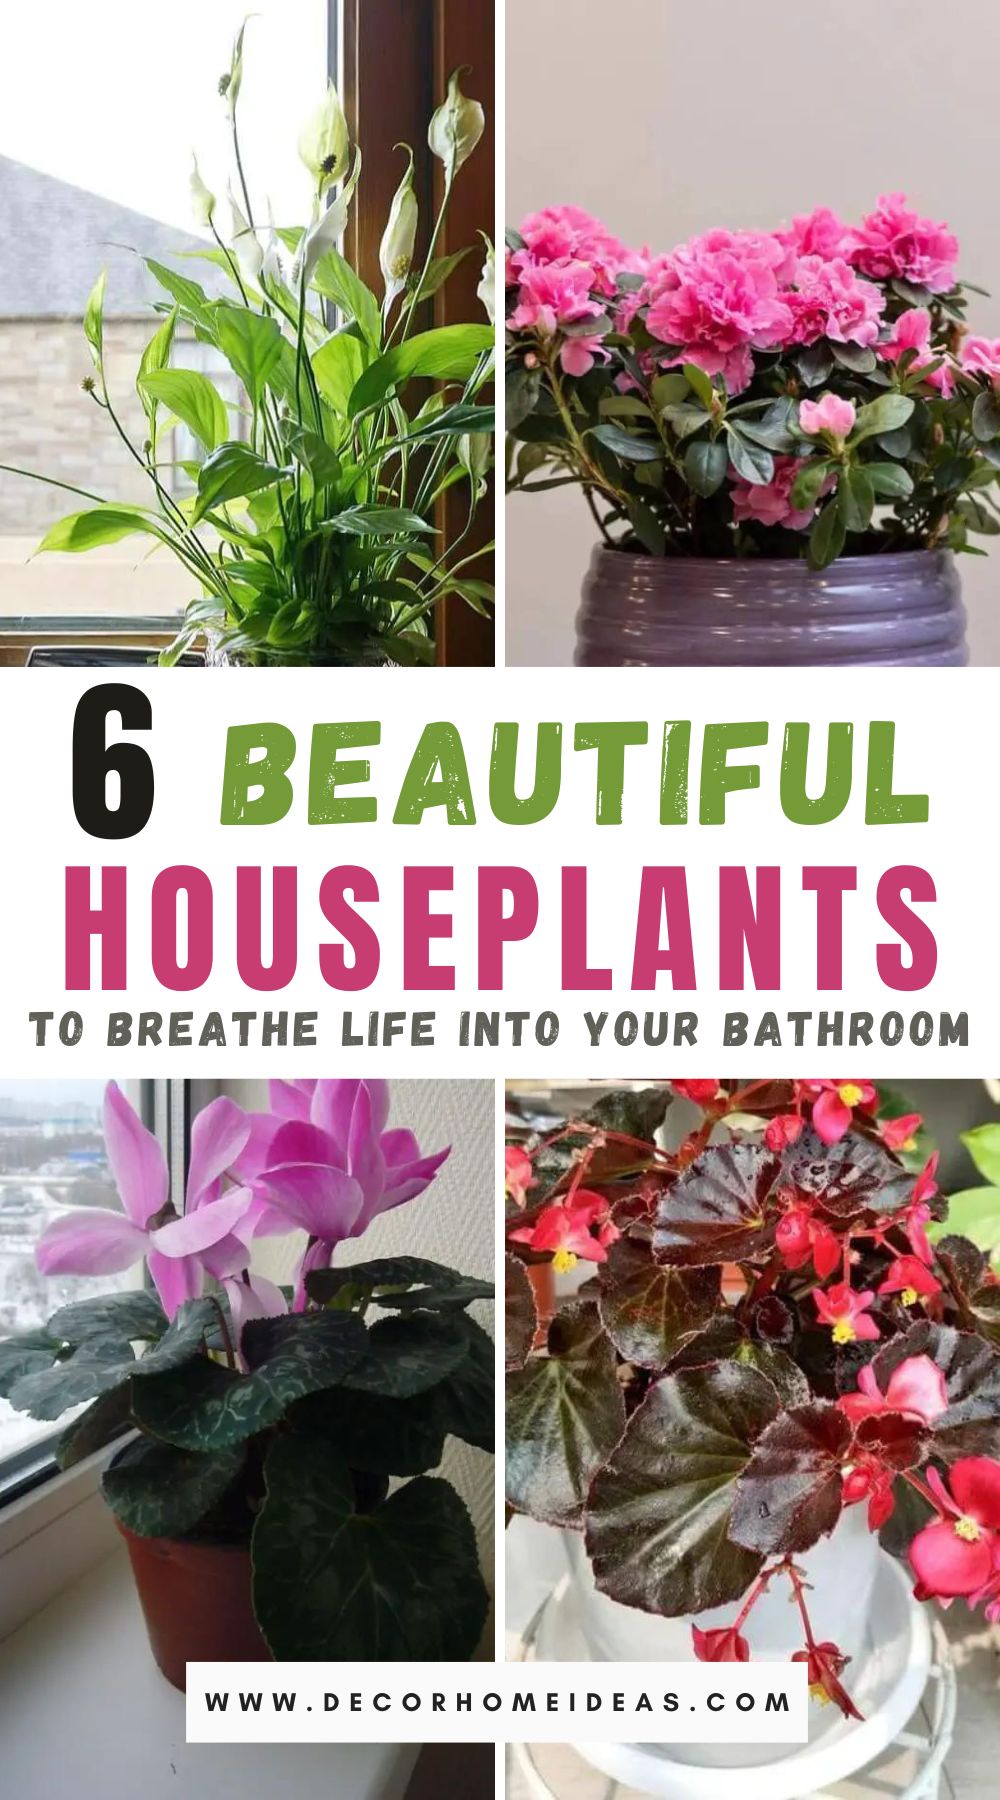 Brighten up your bathroom with these 6 beautiful flowering houseplants. From petunias to orchids, there's something for everyone!